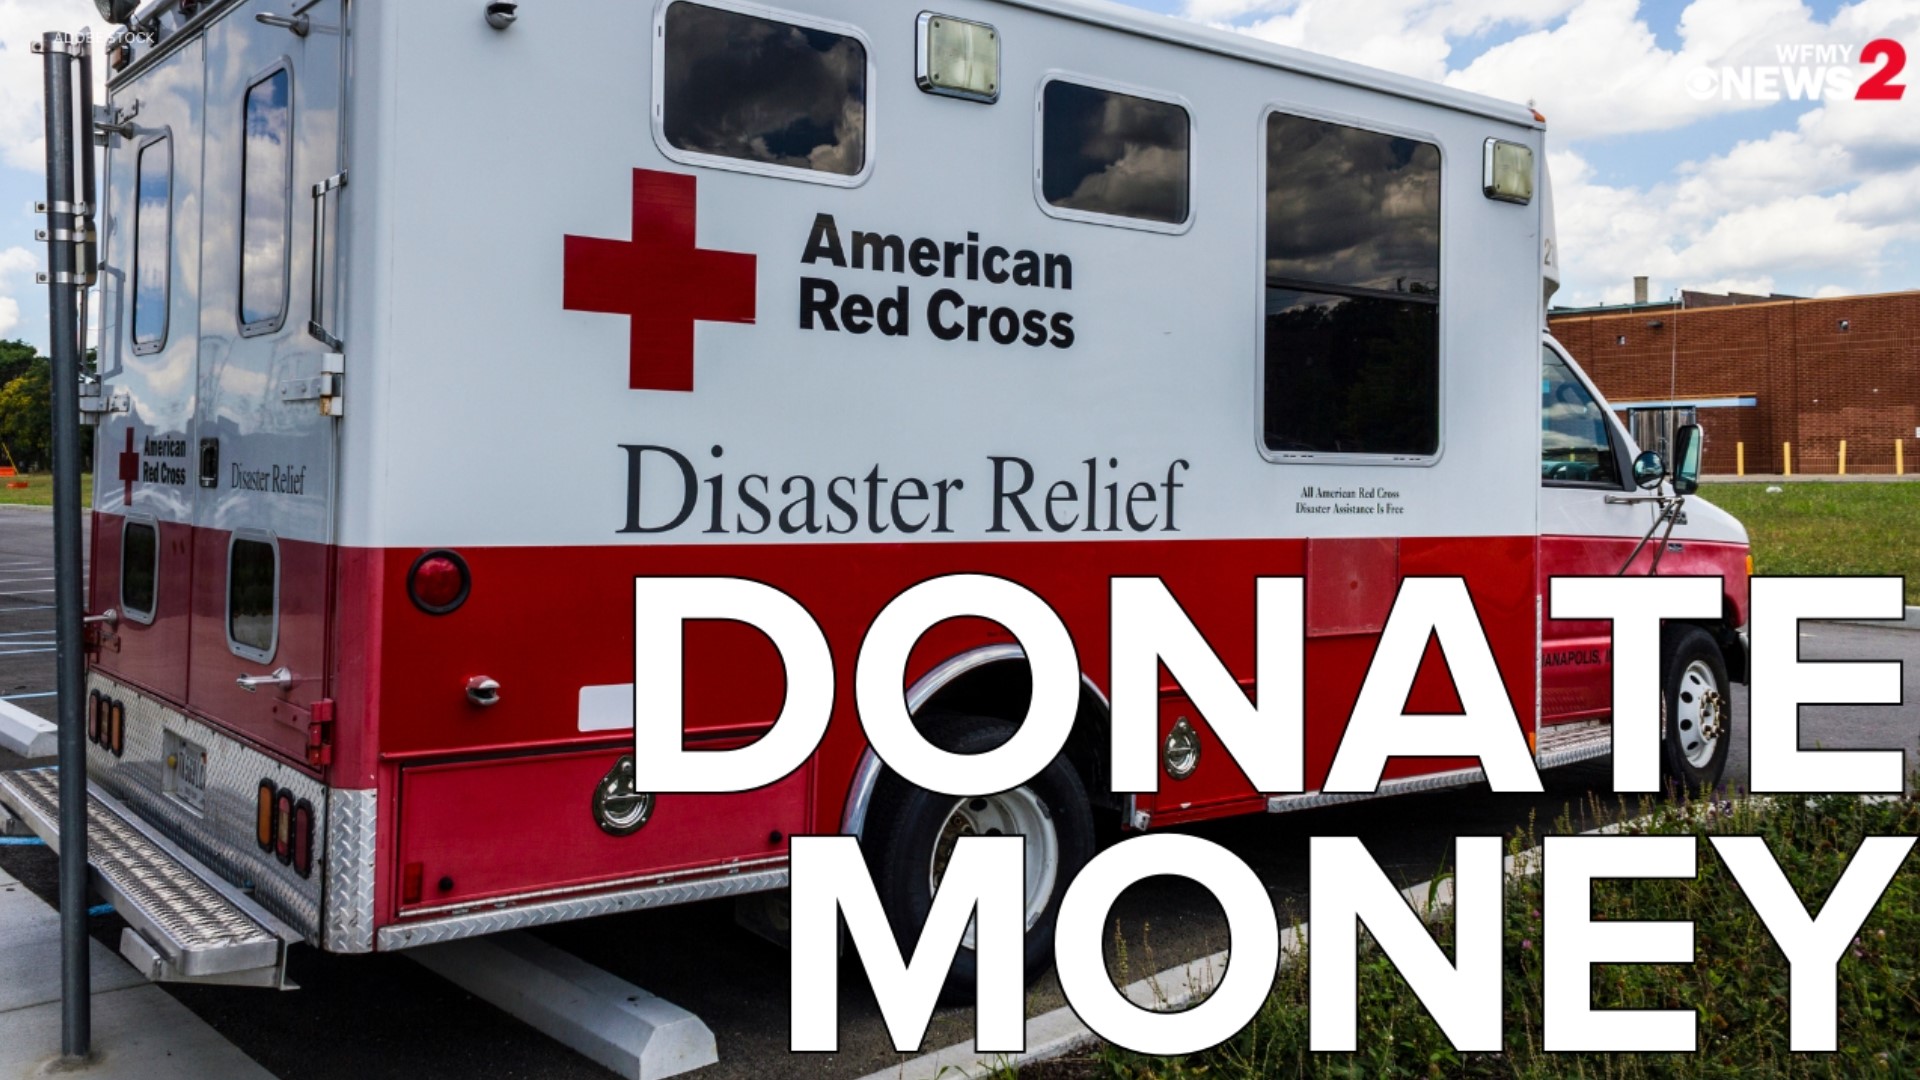 90 cents of every dollar that is donated to the Red Cross goes to benefit and support those who are affected by the disaster.